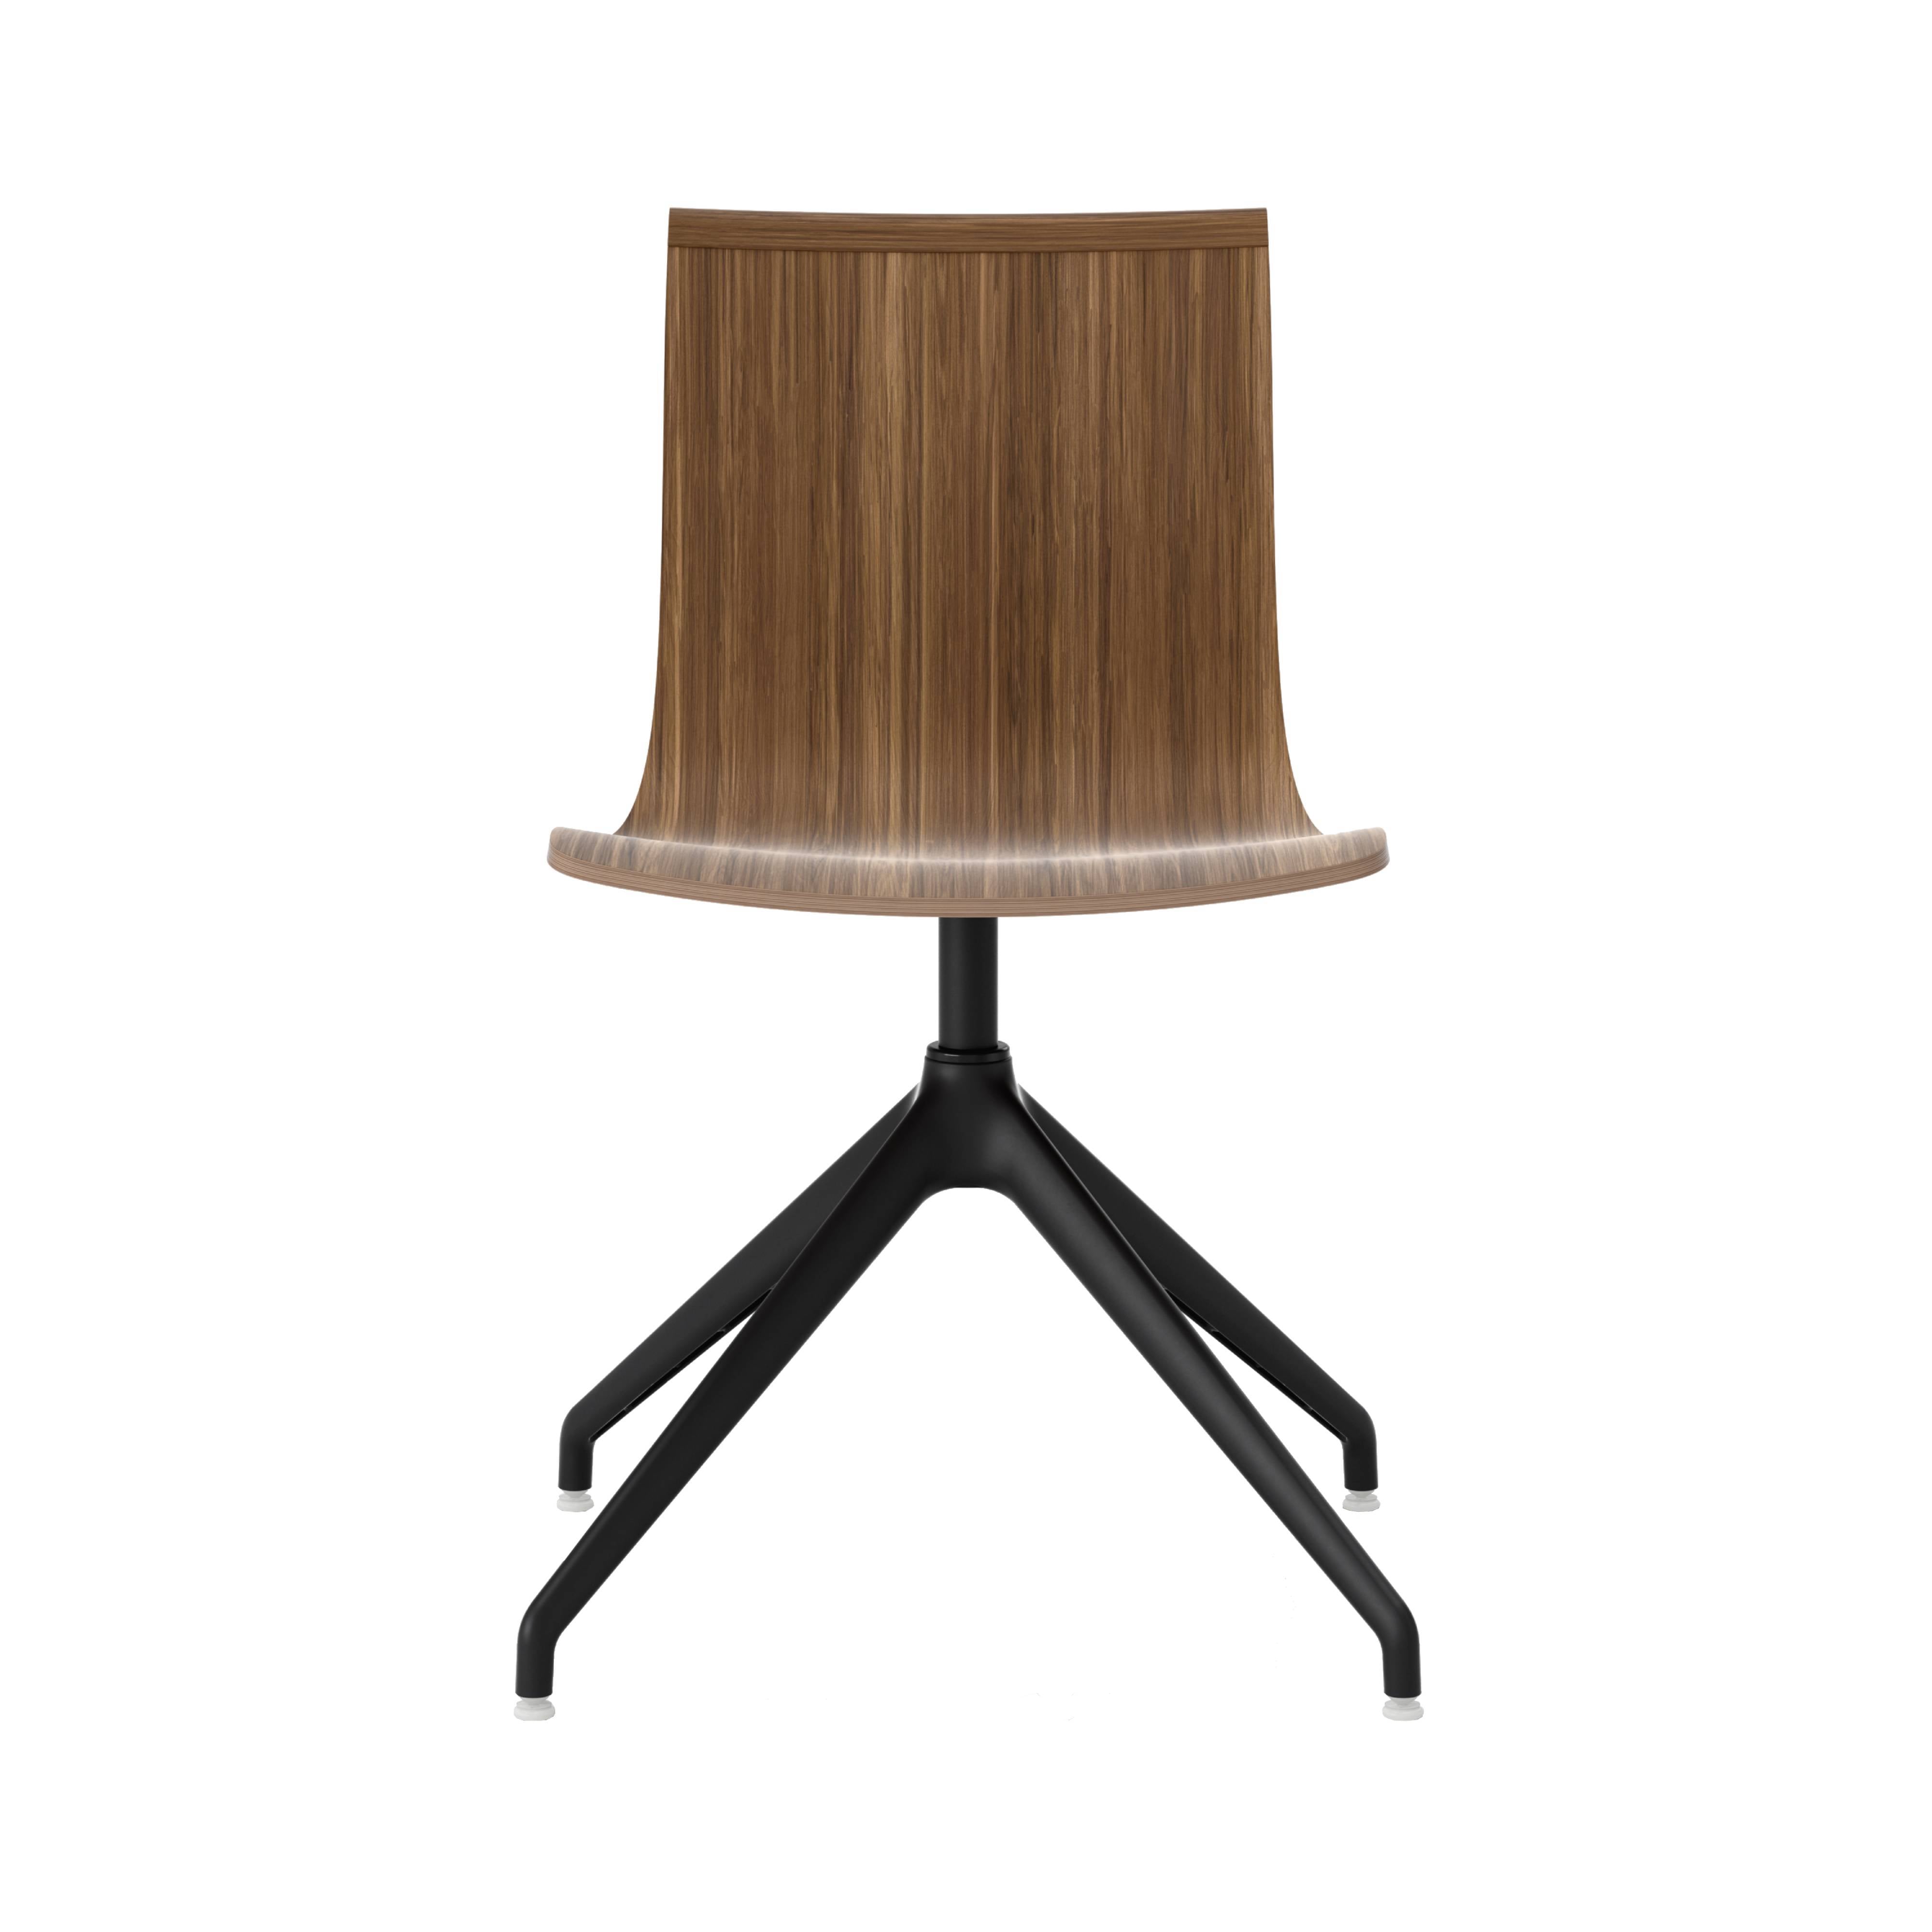 Serif Chair: 4 Star Base + Black + Walnut Stained Beech + Without Arm